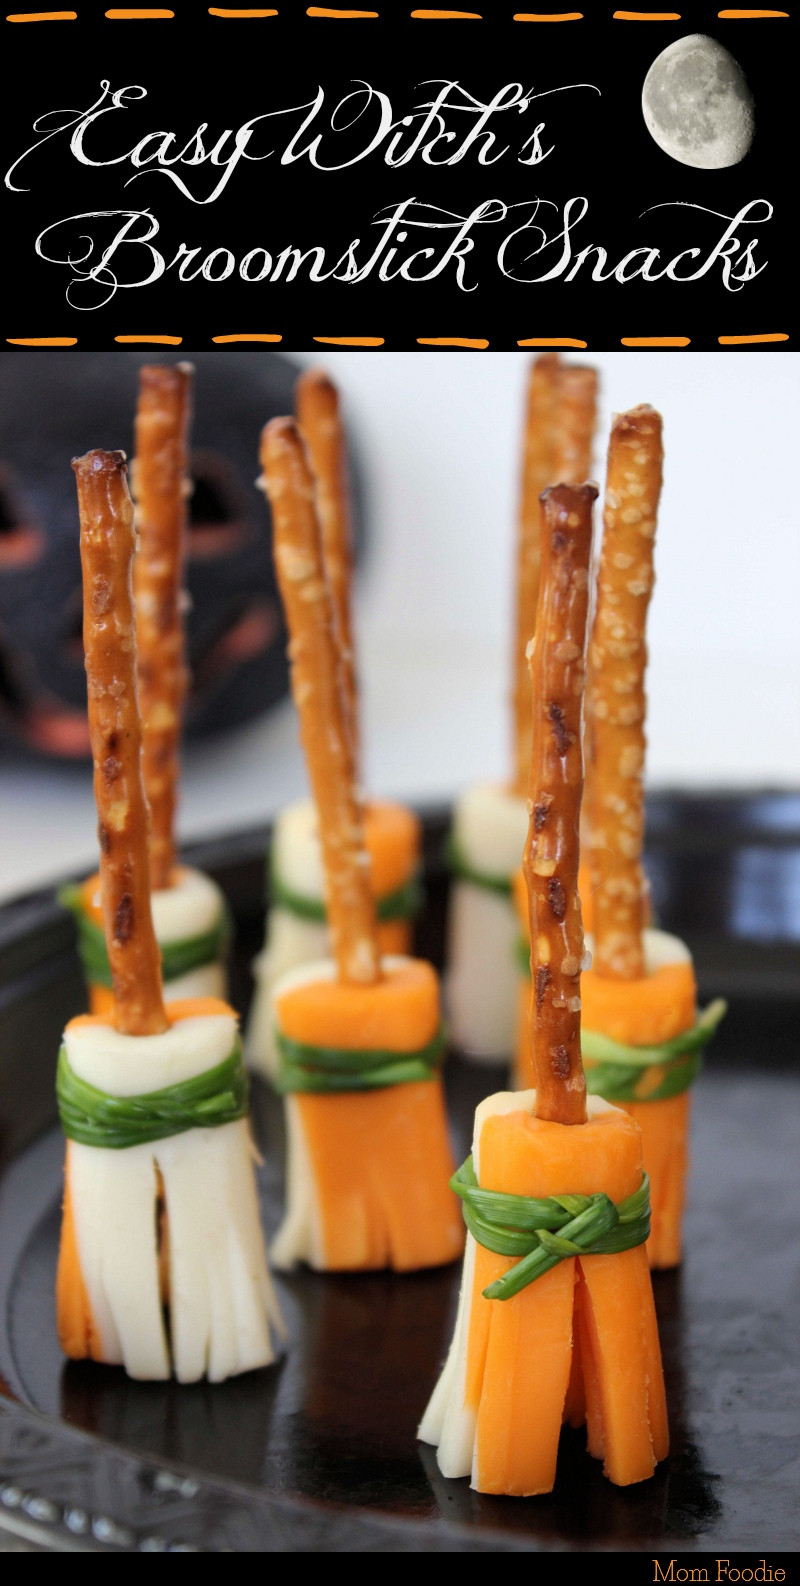 Halloween Party Food Ideas Pinterest
 Witch s Broomstick Snacks